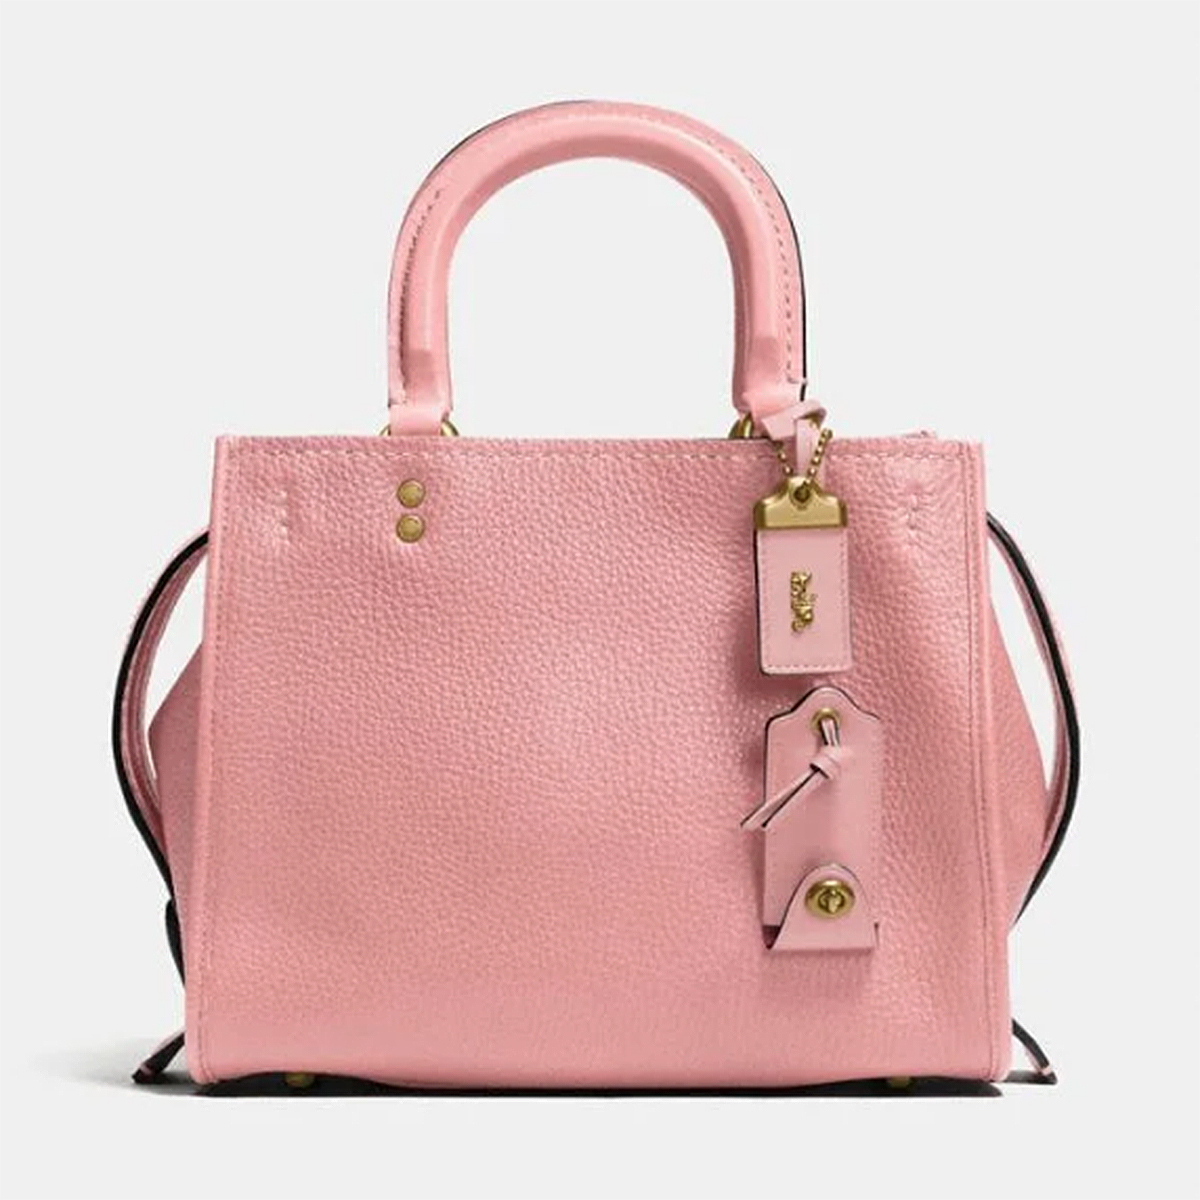 5 Coach Bags You Can Still Gift by Christmas — All on Sale! Us Weekly